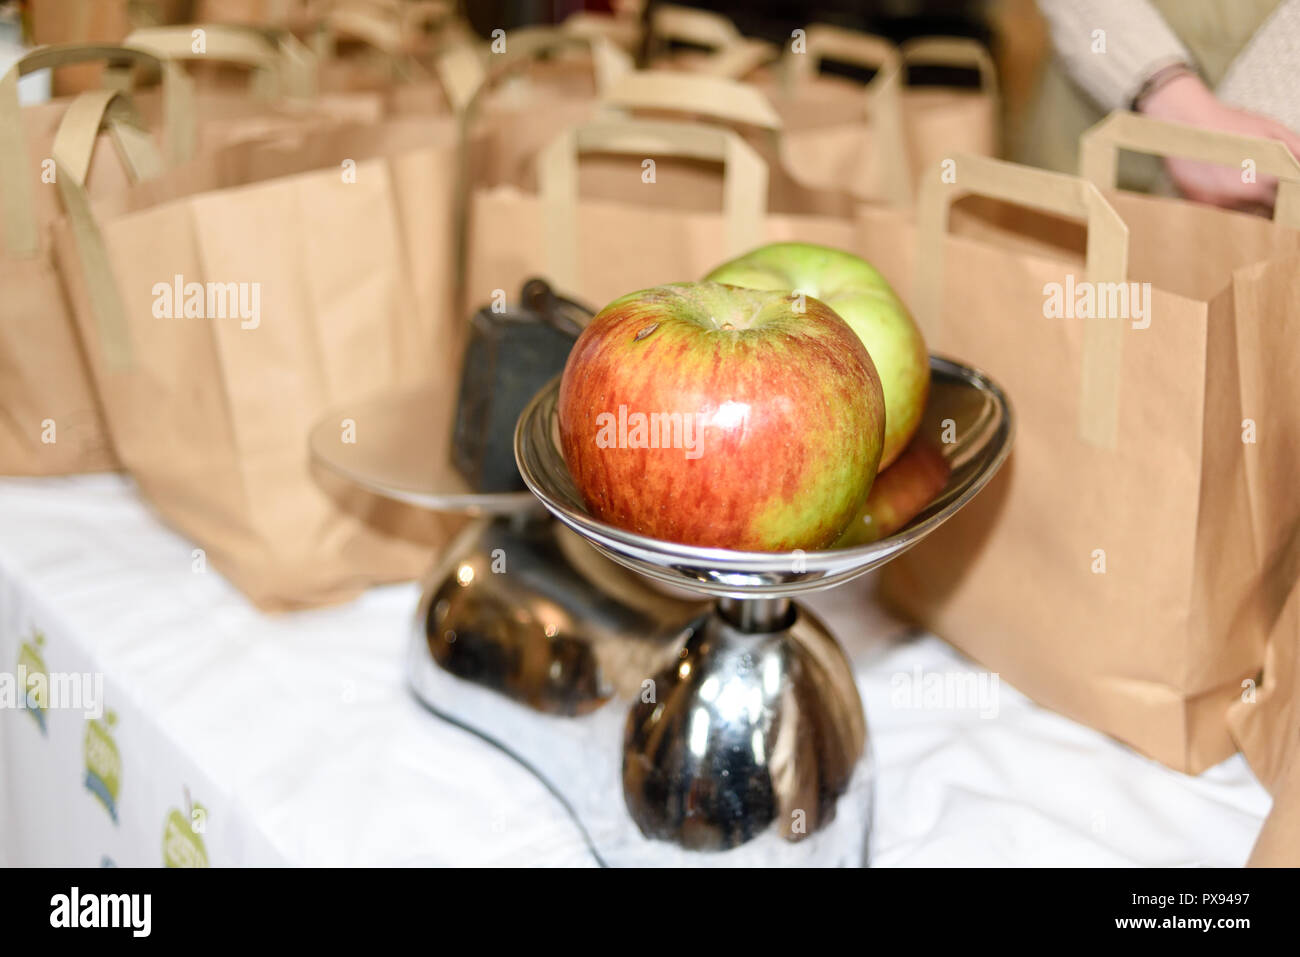 Southwell, Nottinghamshire, UK. 20th Oct 2018. The Minster town of Southwell and home of the famous cooking apple celebrate all things Bramley apple with stalls, cooking displays morris dancers and even King Charles 1 turned-up. Credit: Ian Francis/Alamy Live News Stock Photo